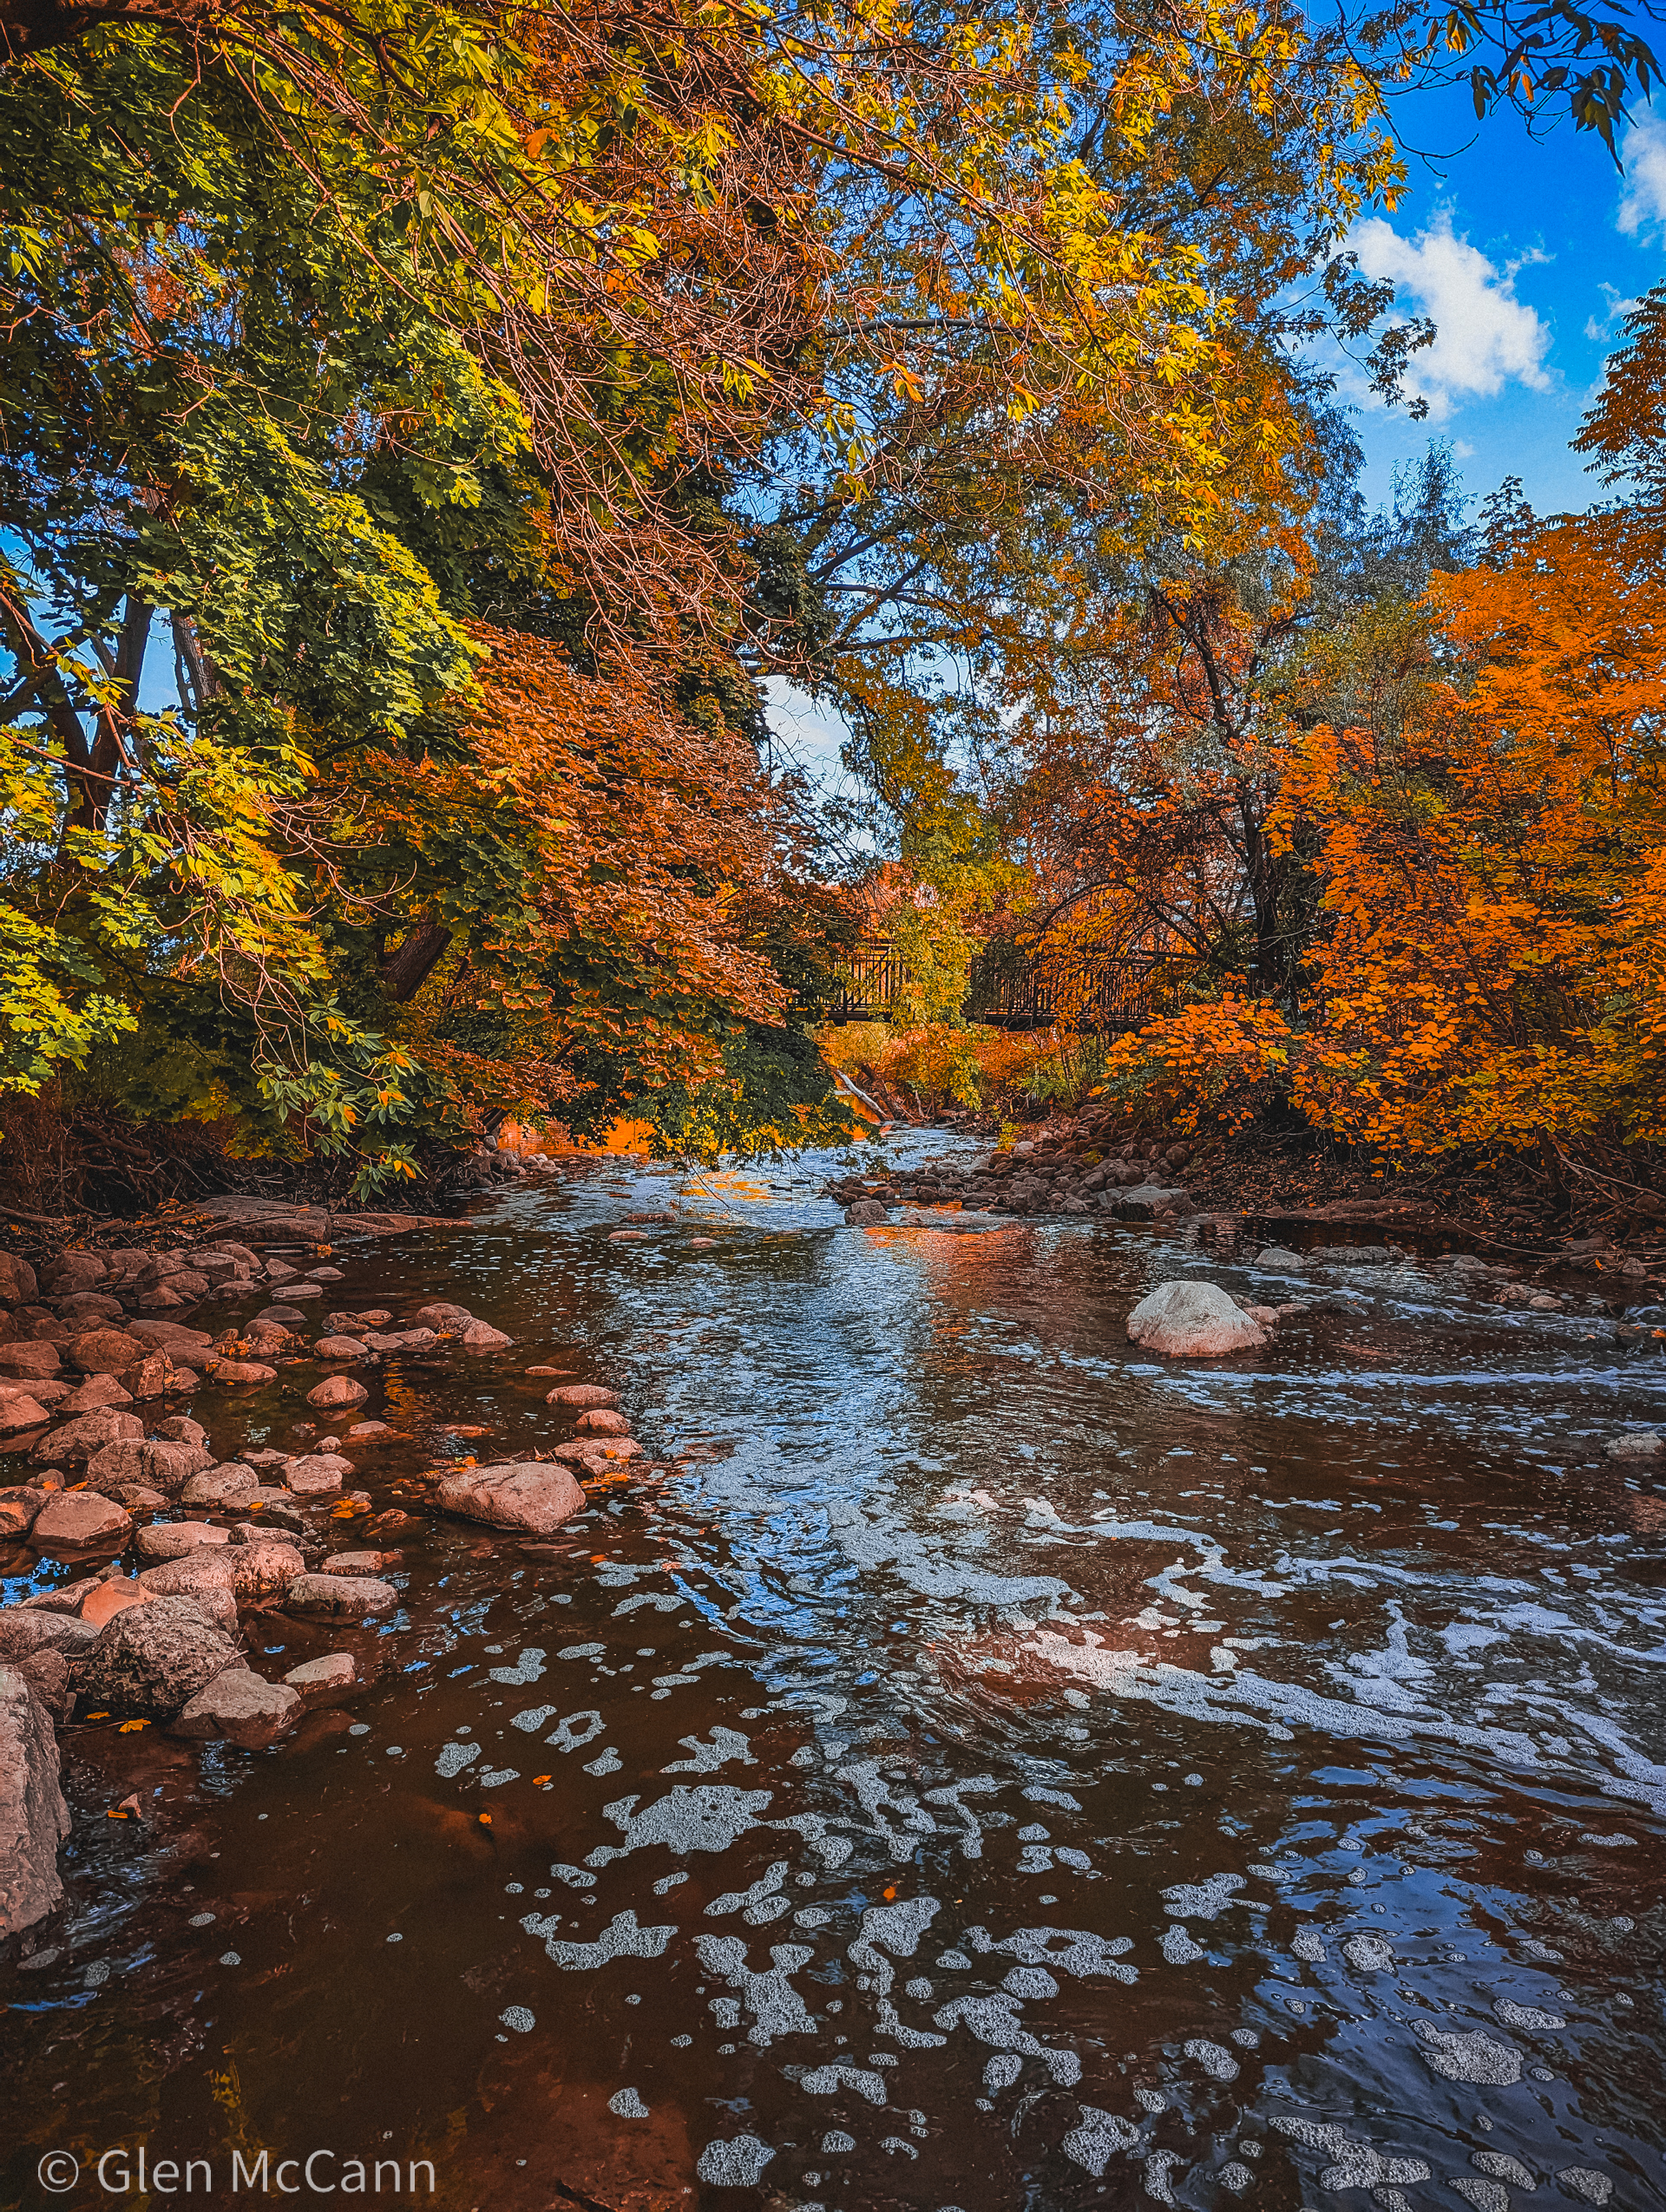 Photo of a bridge from the point of view of the river below, surrounded by fall foliage.